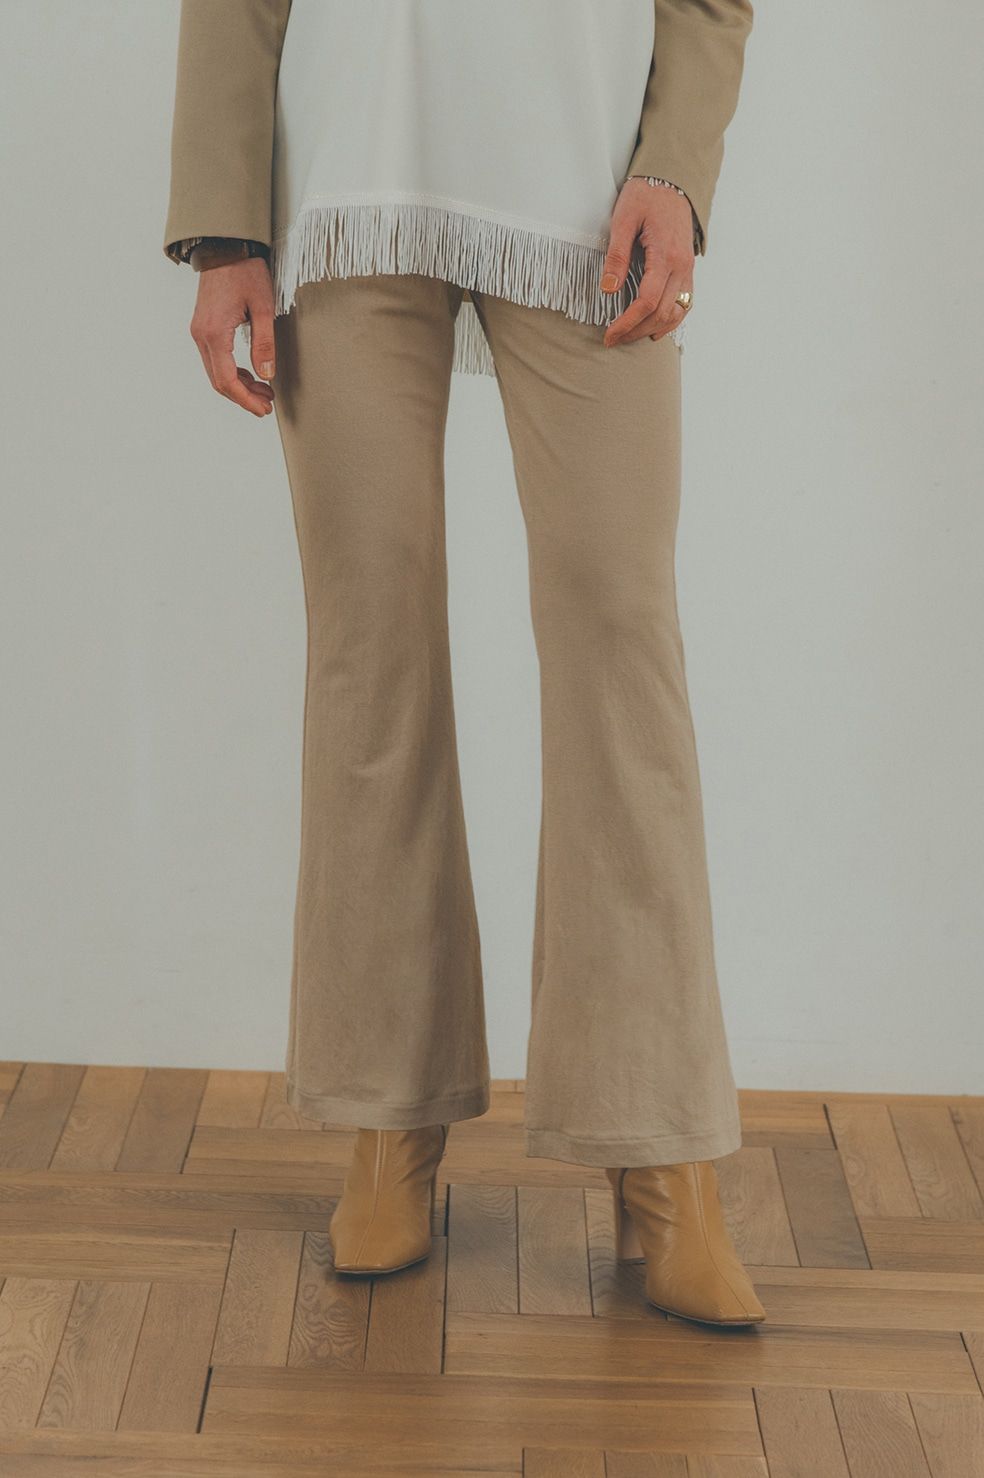 CLANE SOFT JERSEY FLARE PANTS